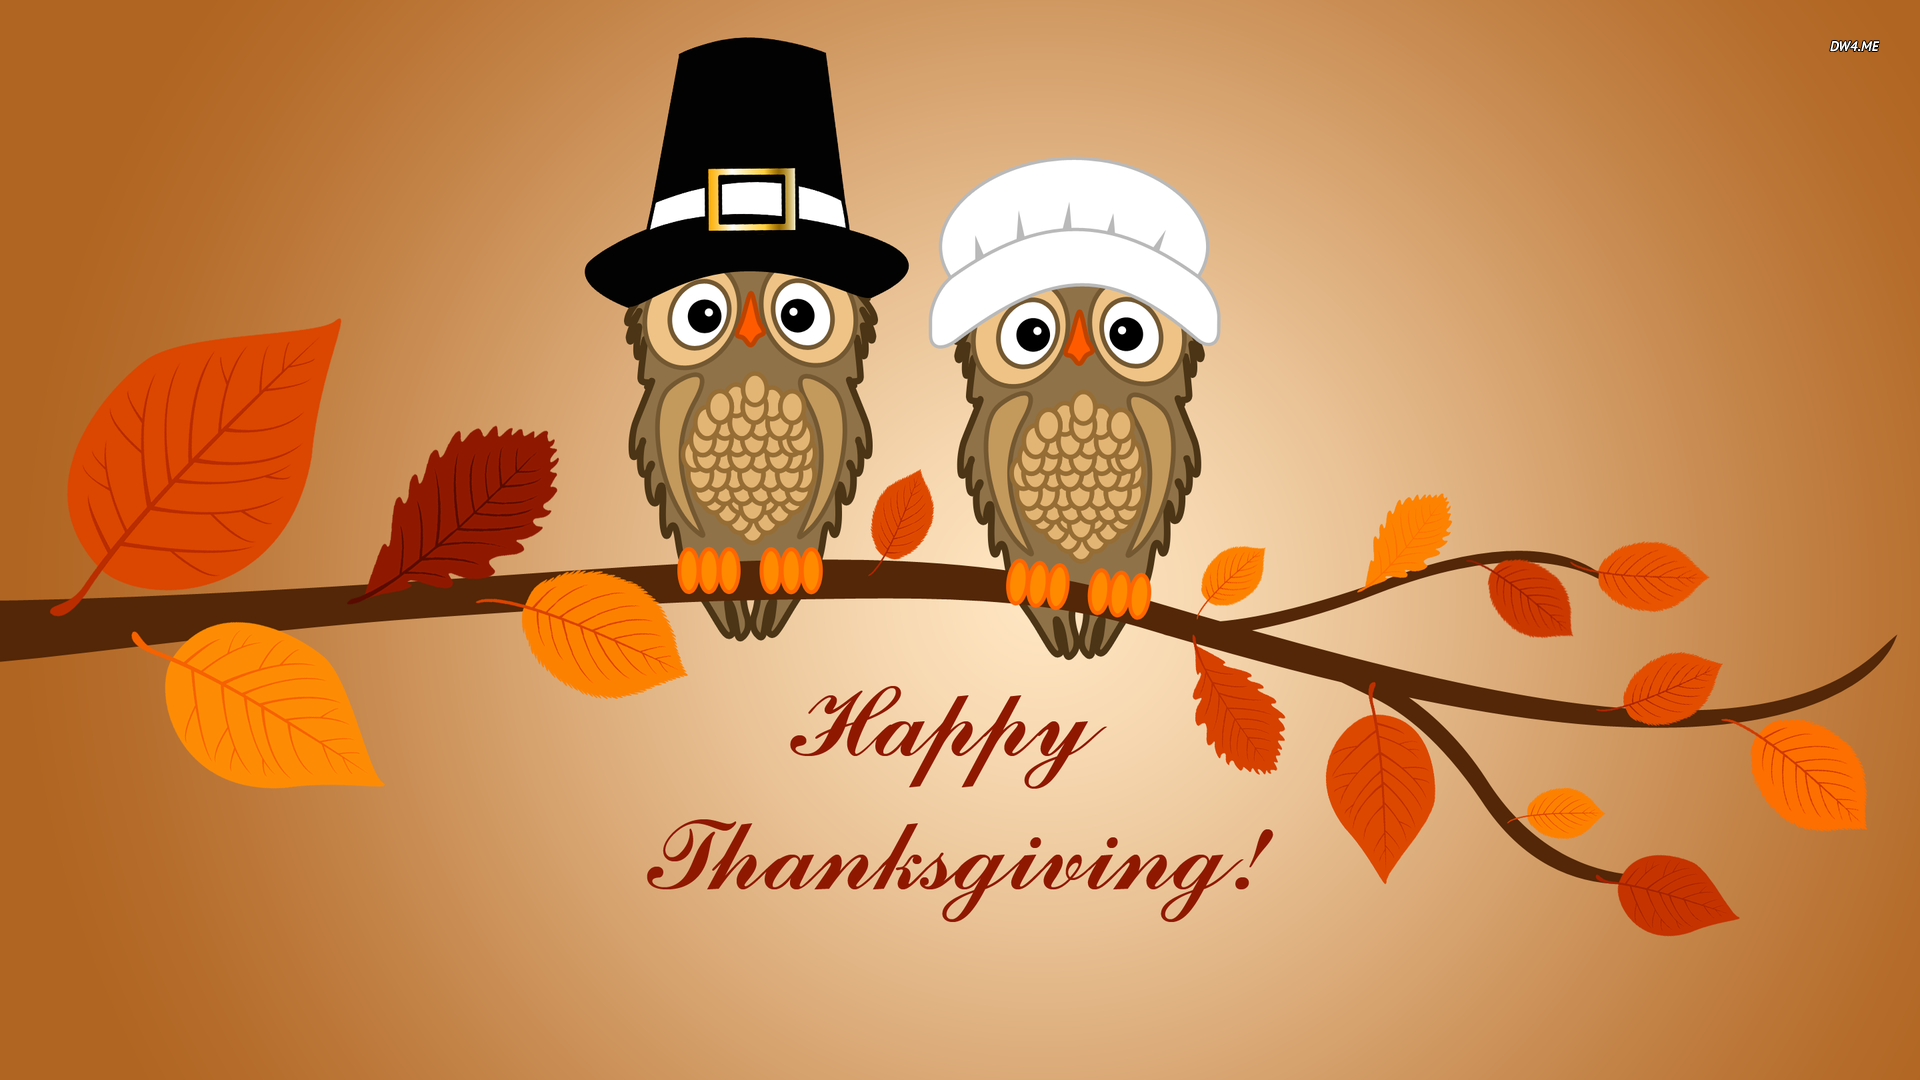 Happy Thanksgiving to our American Members!